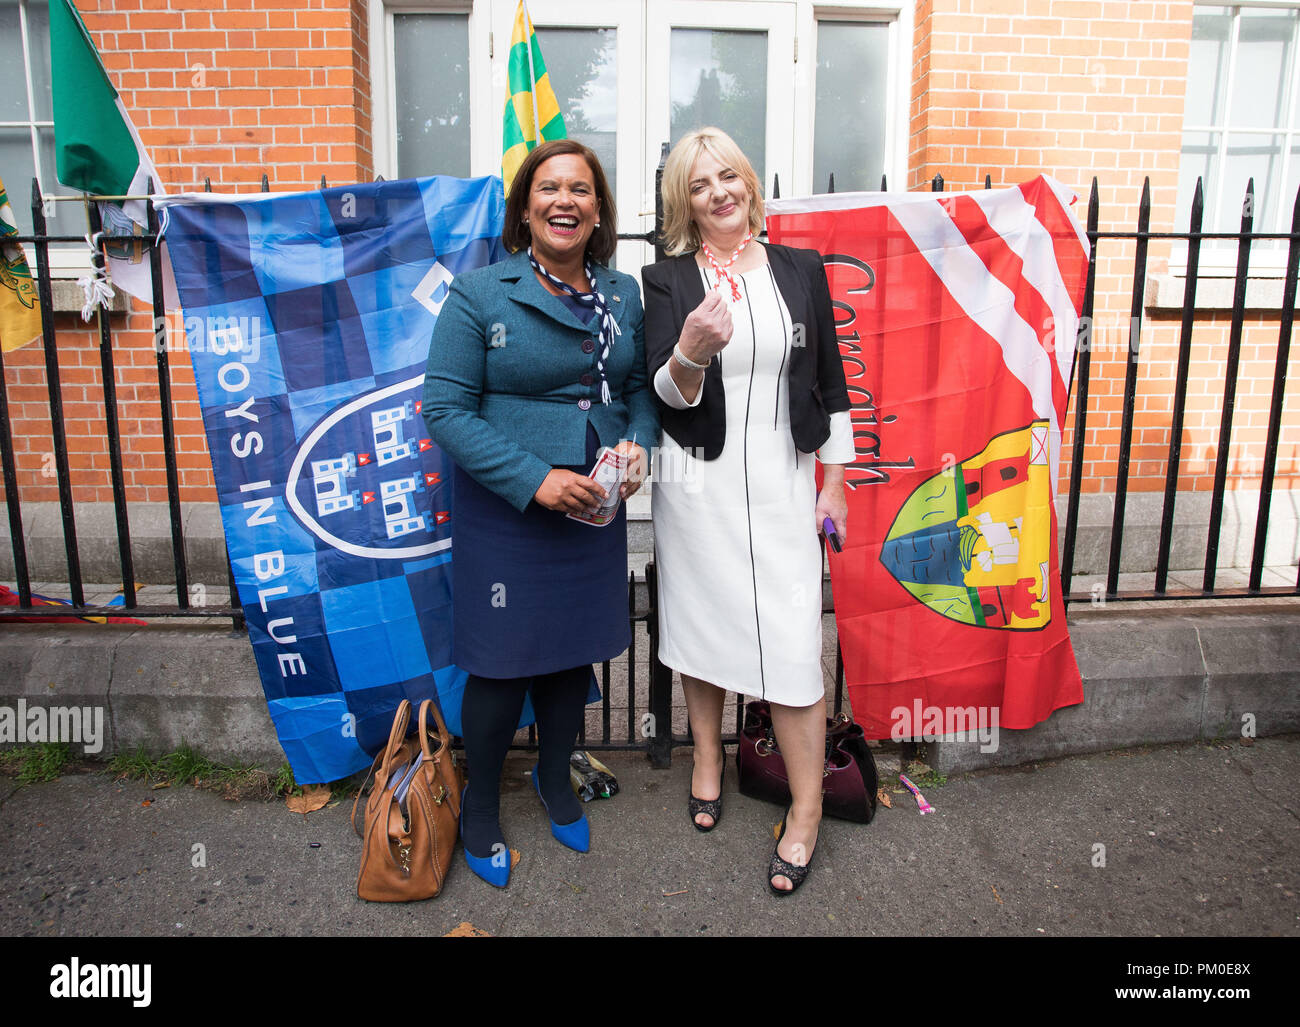 Sinn Fein President Mary Lou McDonald (left) and MEP Liadh N’ Riada on their way to watch an All-Ireland Ladies Football Final between Dublin and Cork at Croke Park Dublin, following a press conference in Dublin, where it was confirmed that Liadh will be the party's candidate in the Irish presidential election. Stock Photo